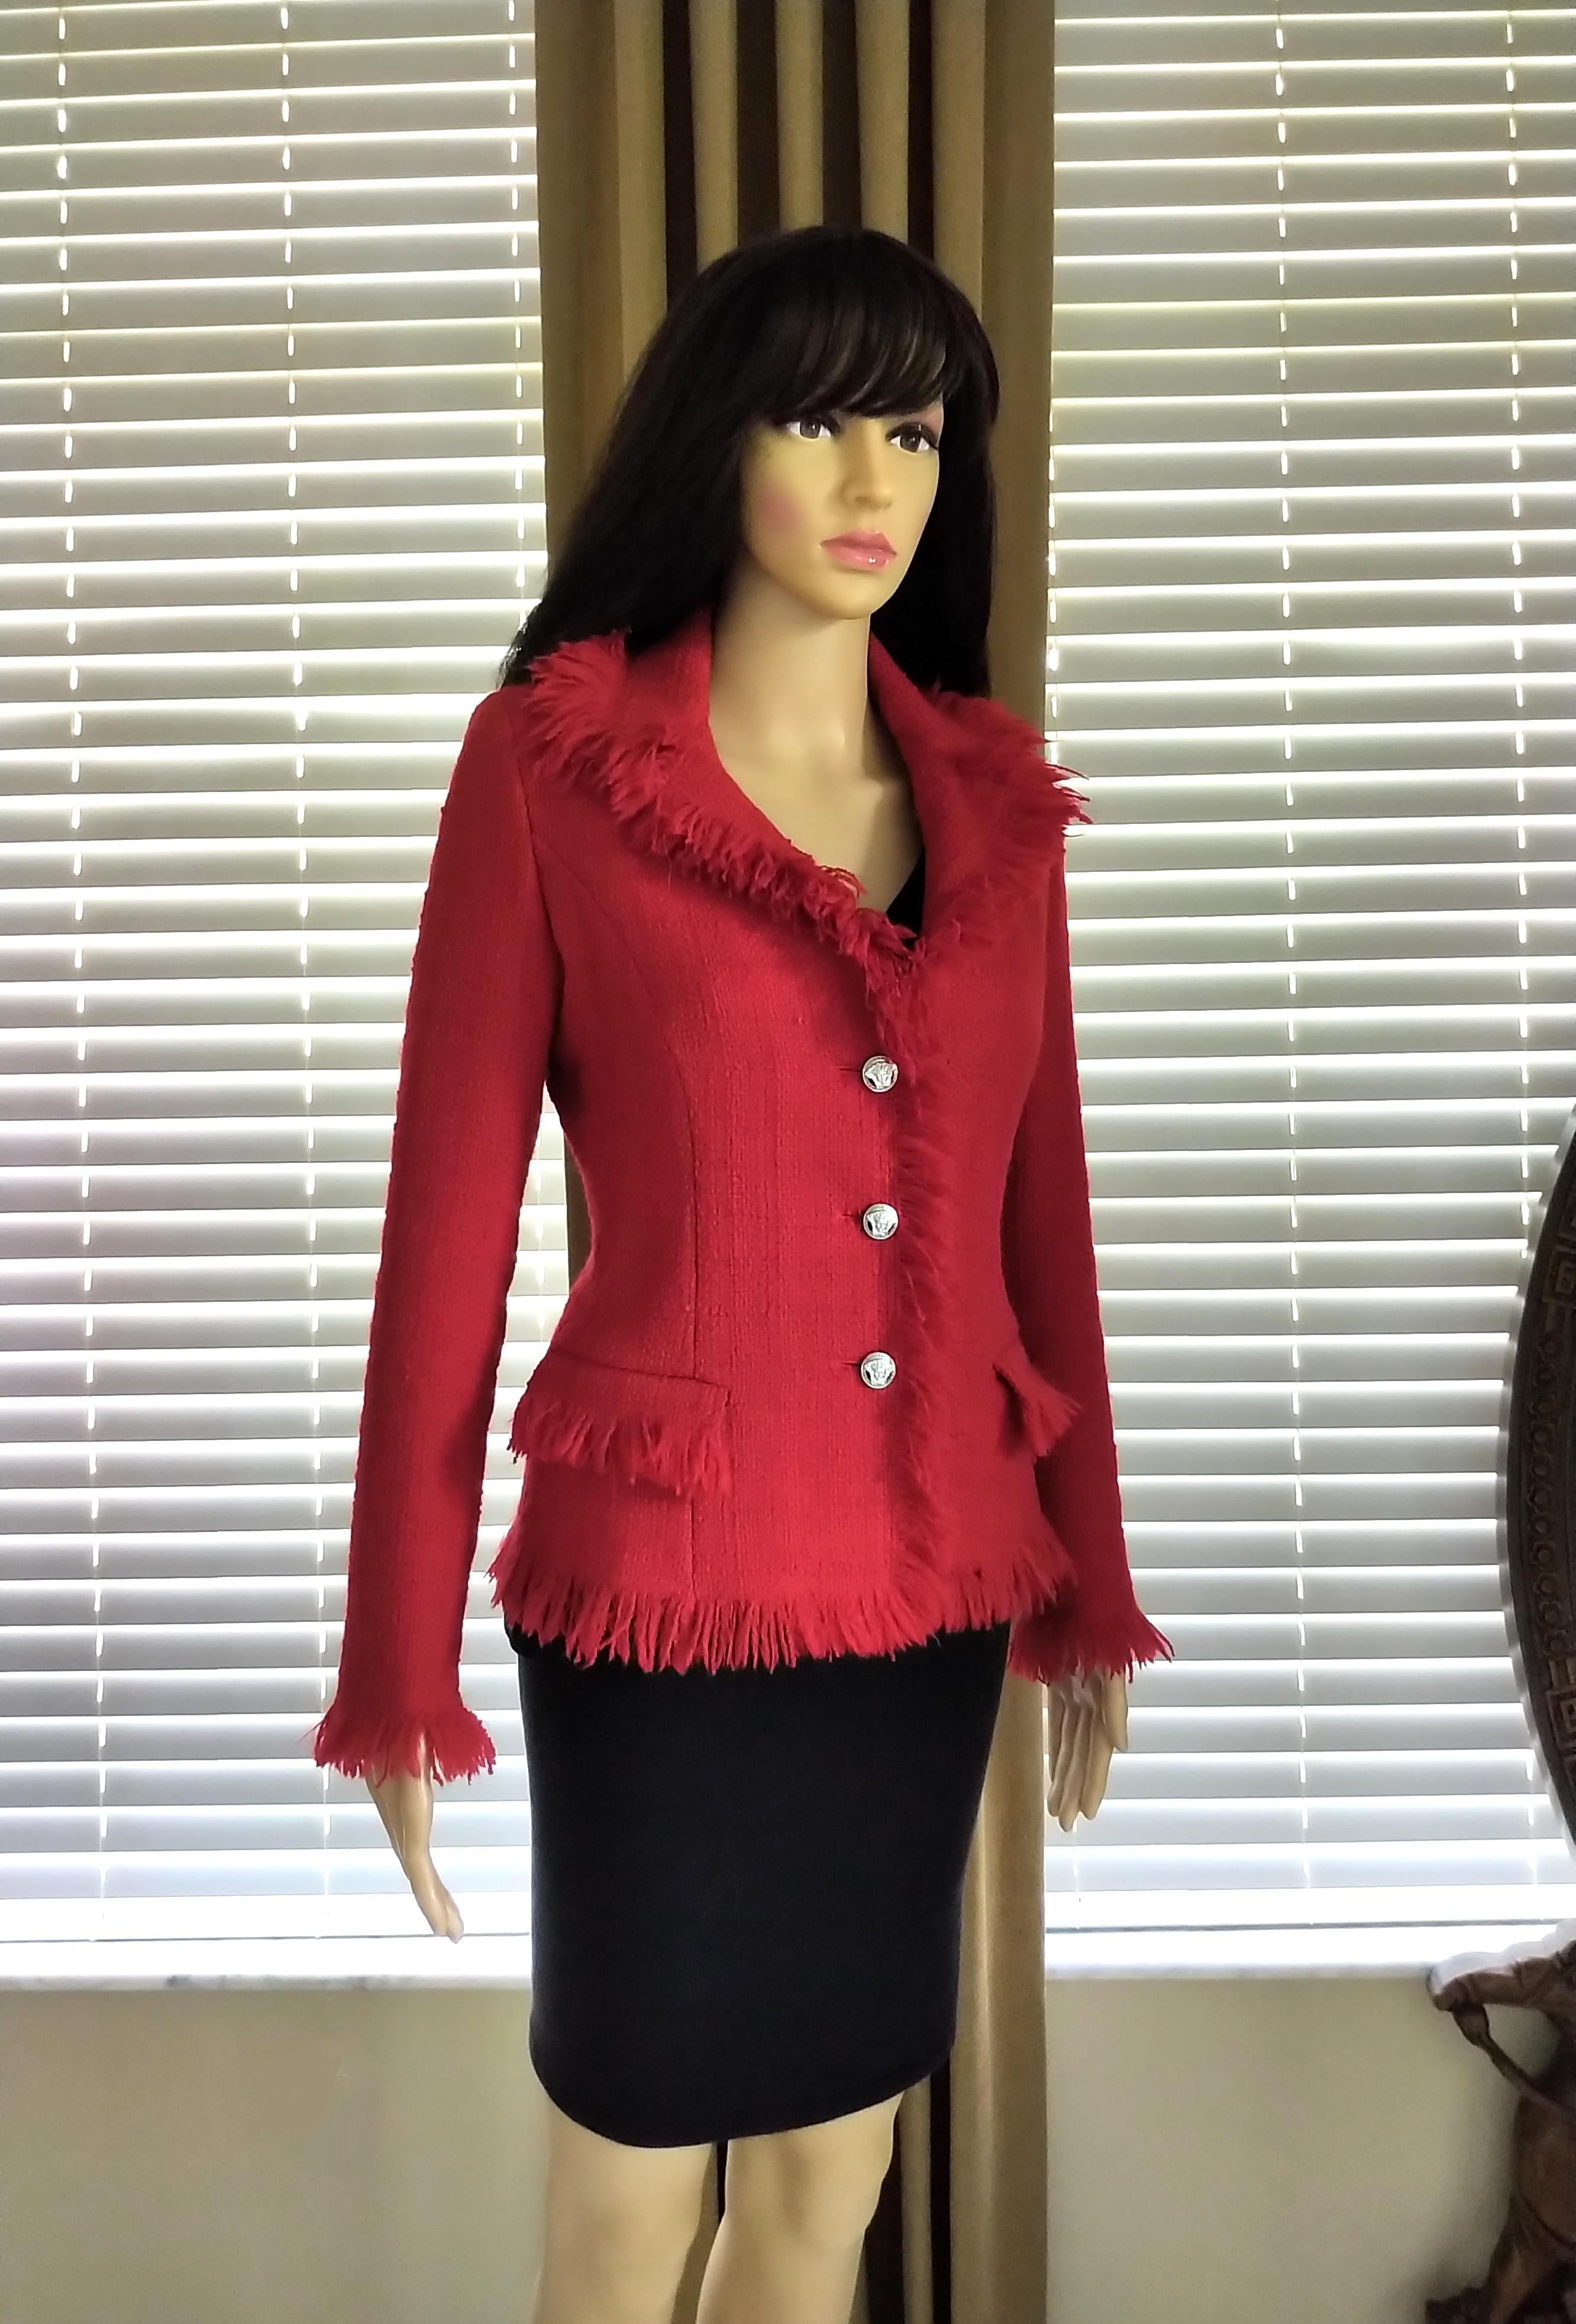 Gianni Versace 1990's Medusa Lipstick Red Tweed Fringe Fitted Jacket IT 38/ 2 4 For Sale 4